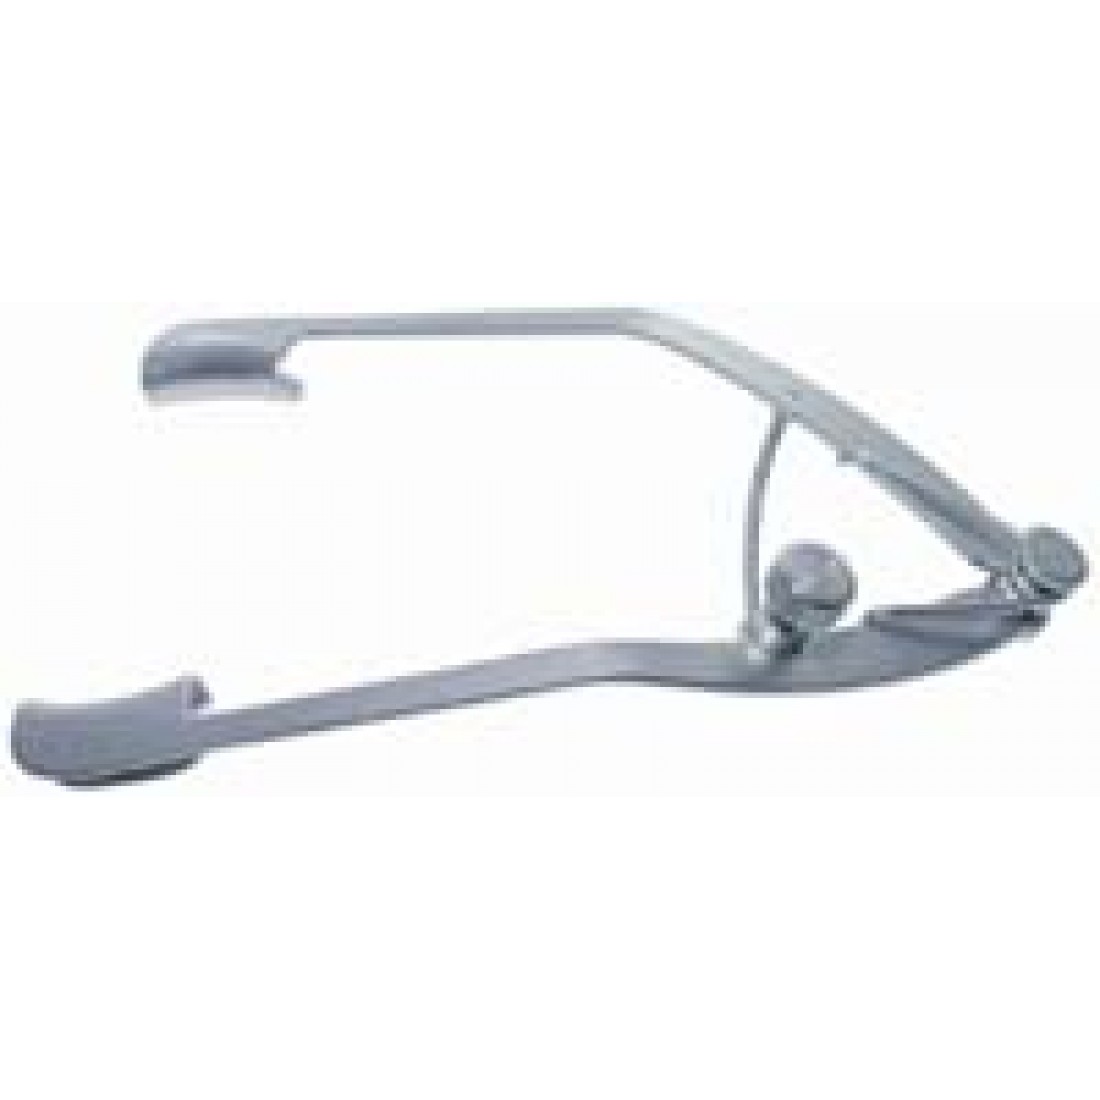 MCPHERSON EYE SPECULUM (solid blades with vertical suture posts)